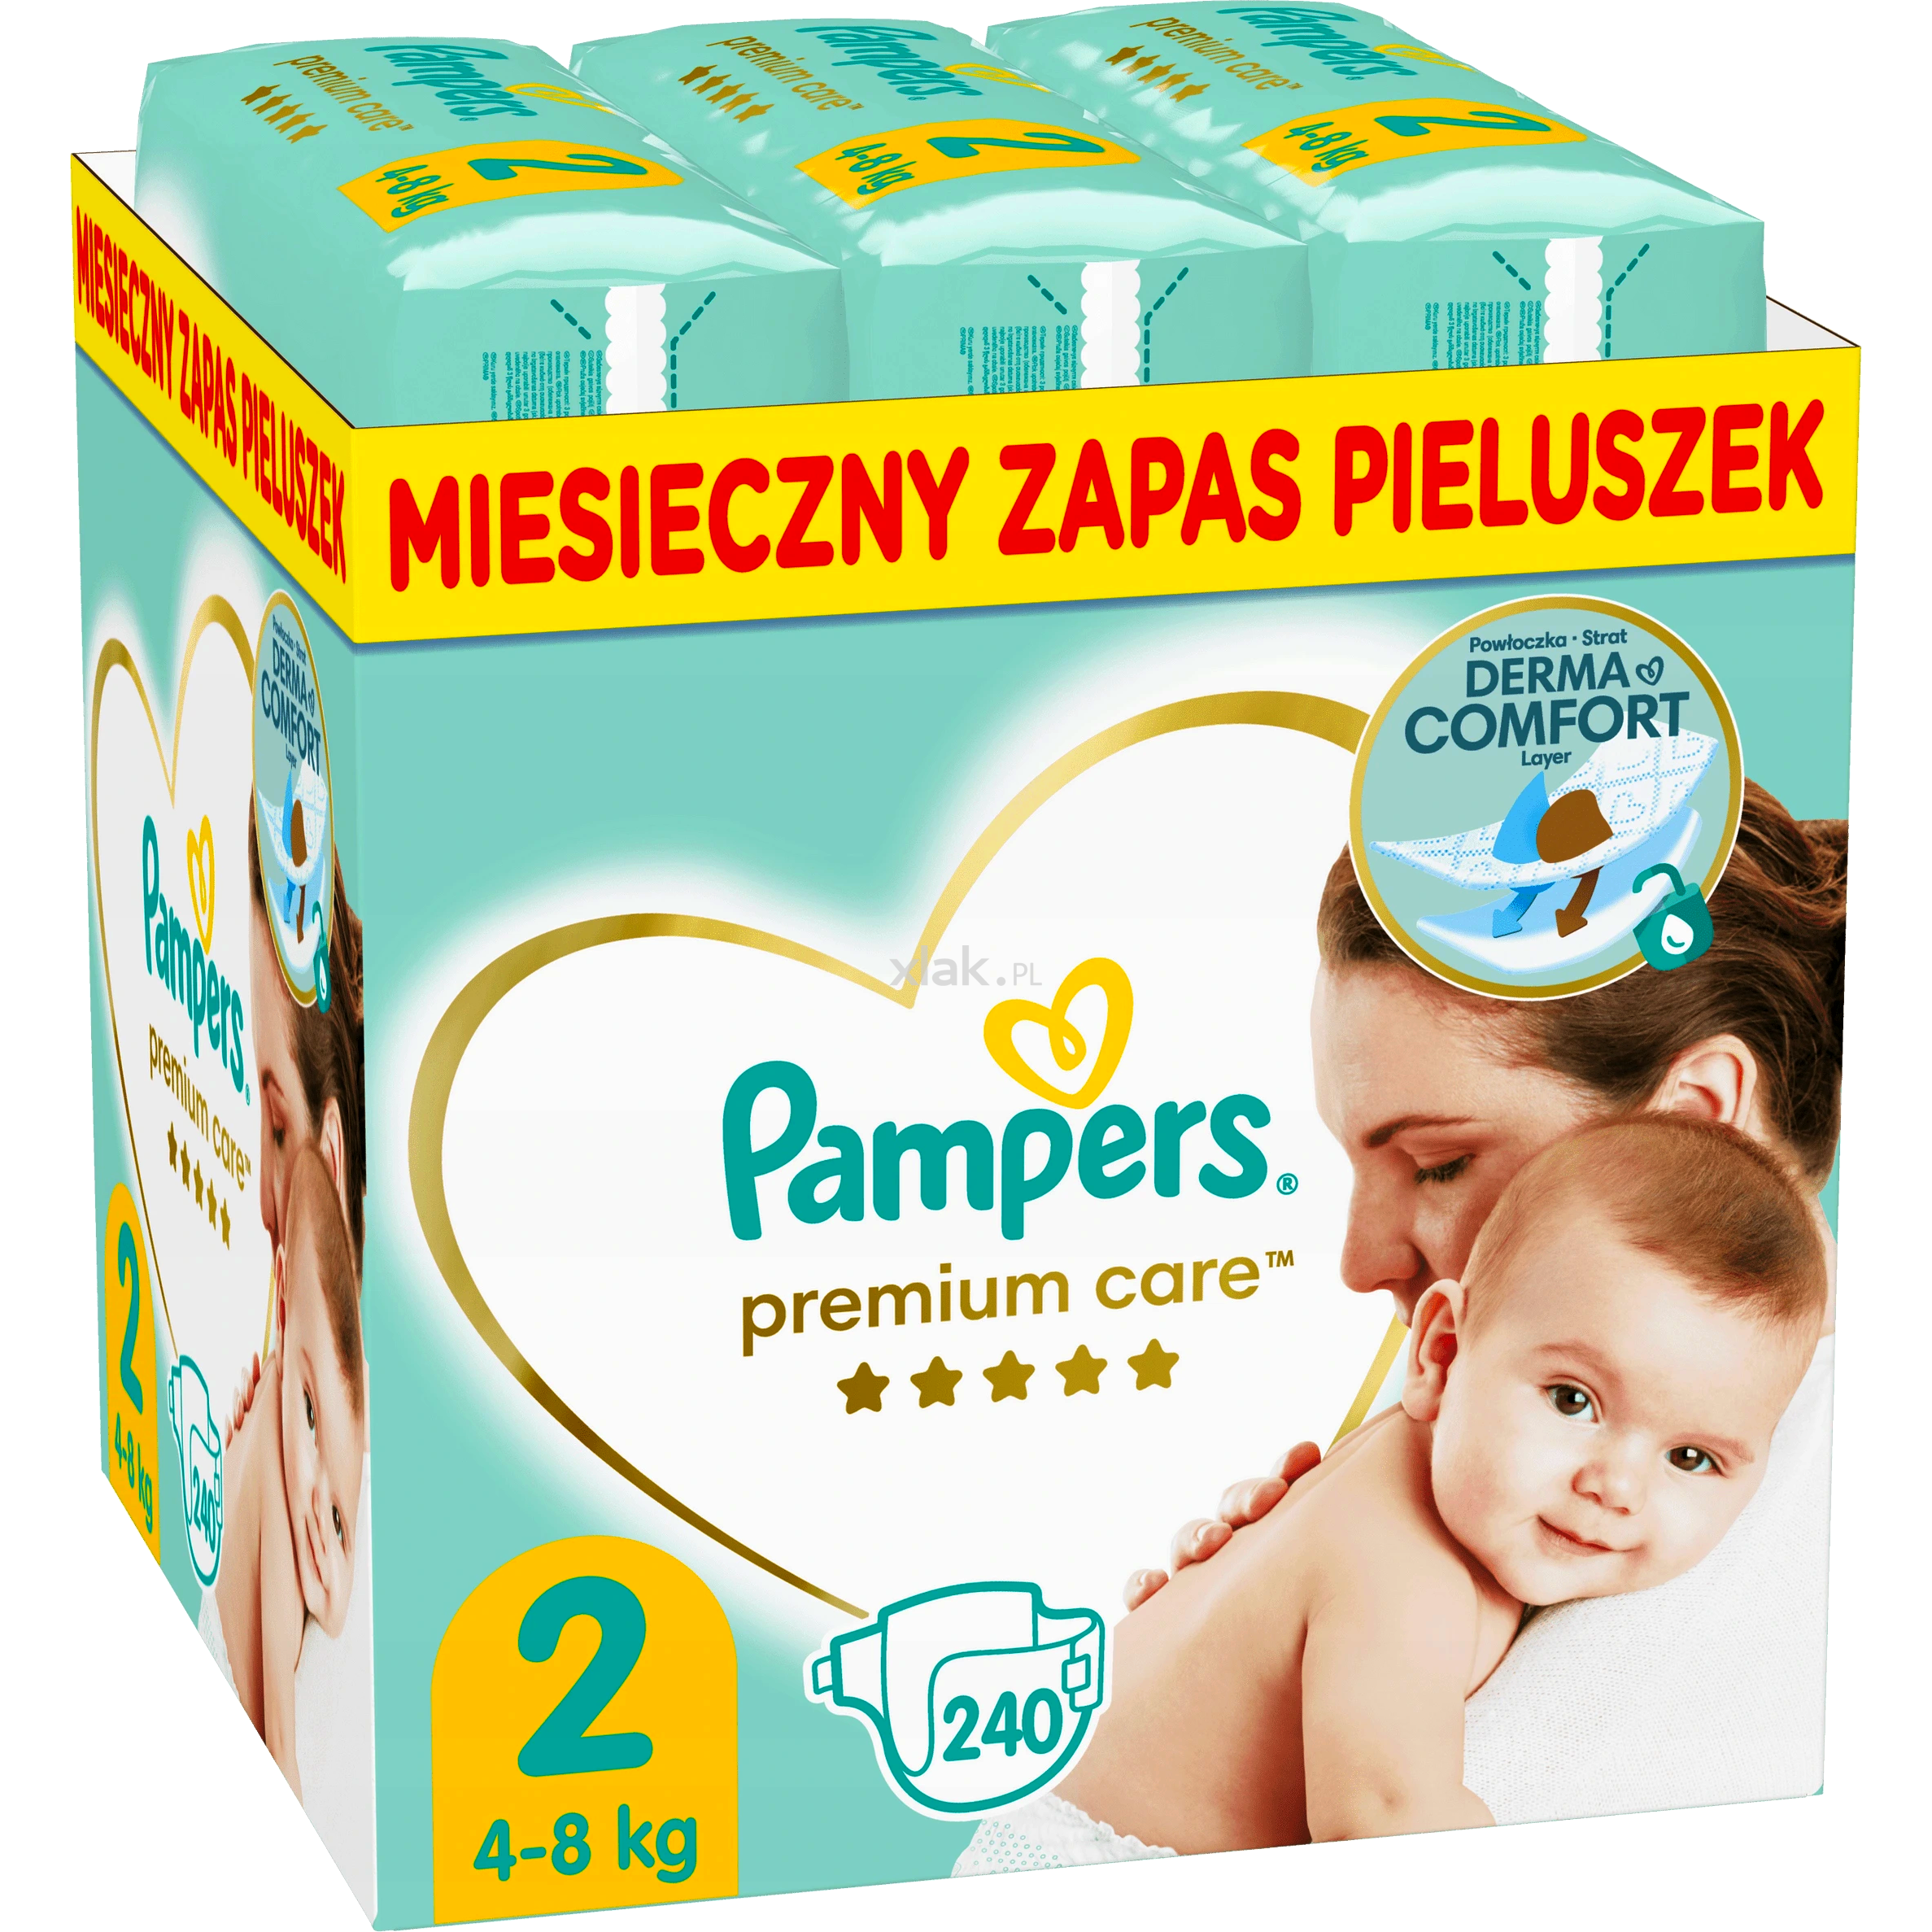 mqn change pampers